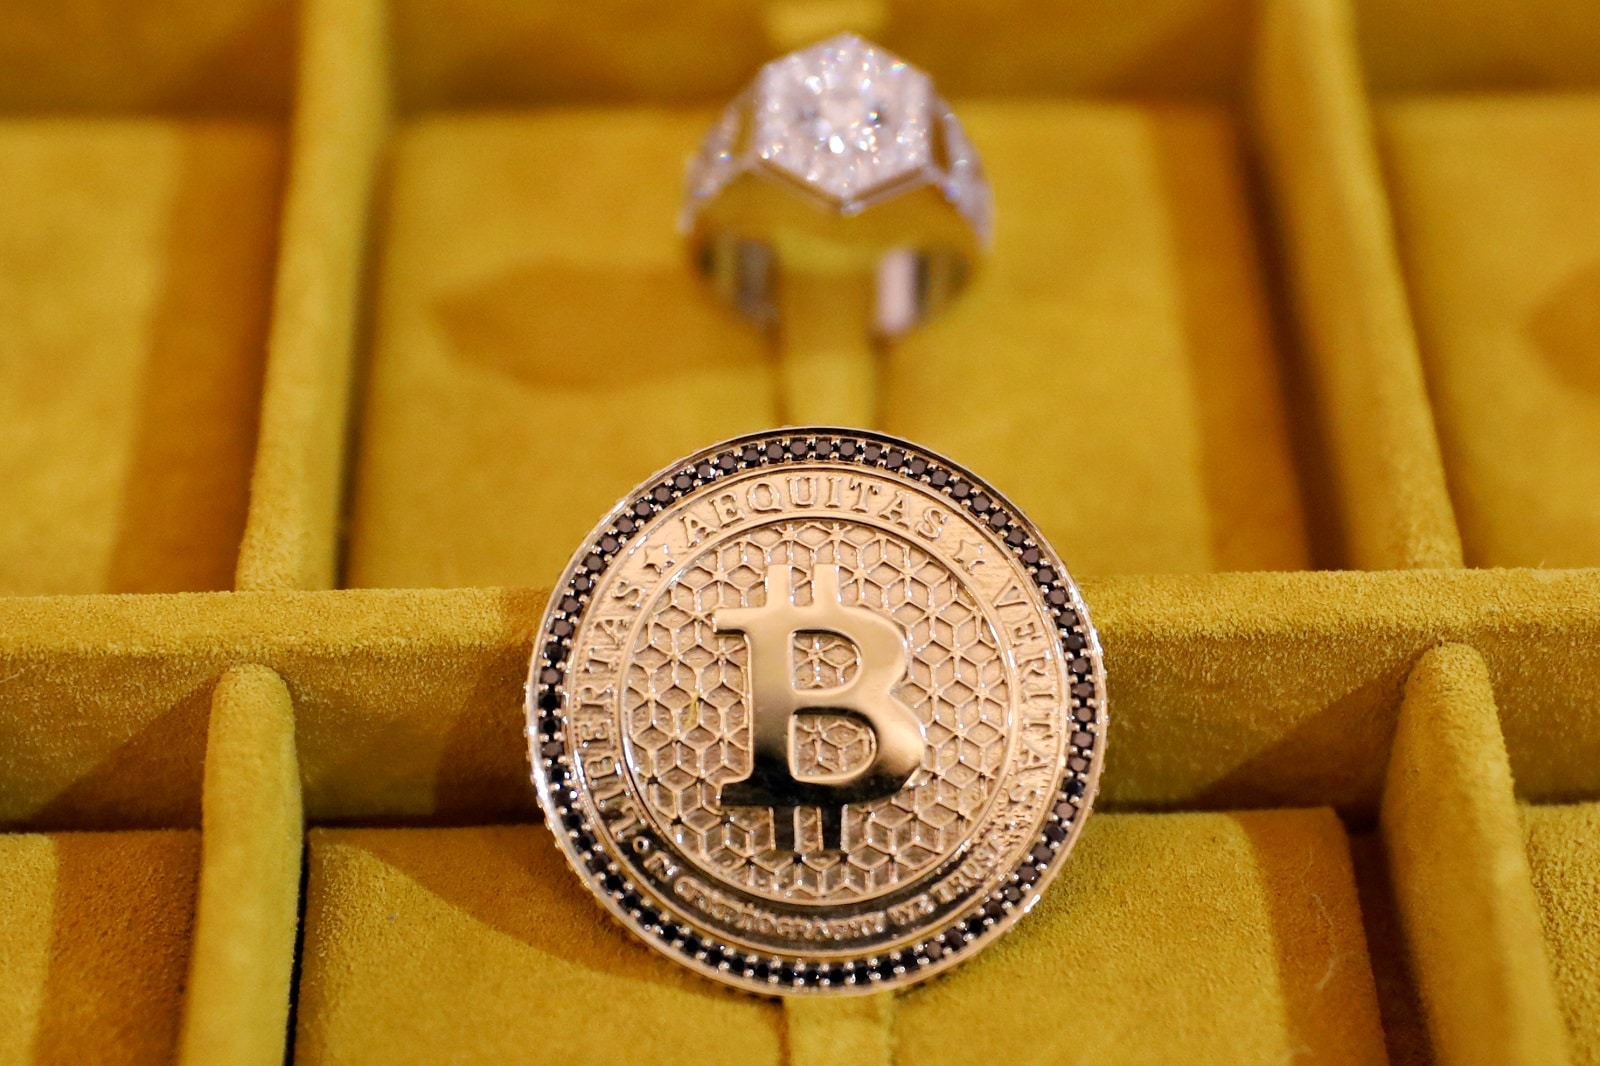 Jewelry with the Bitcoin logo is seen on display at the Consensus 2018 blockchain technology conference in New York City,